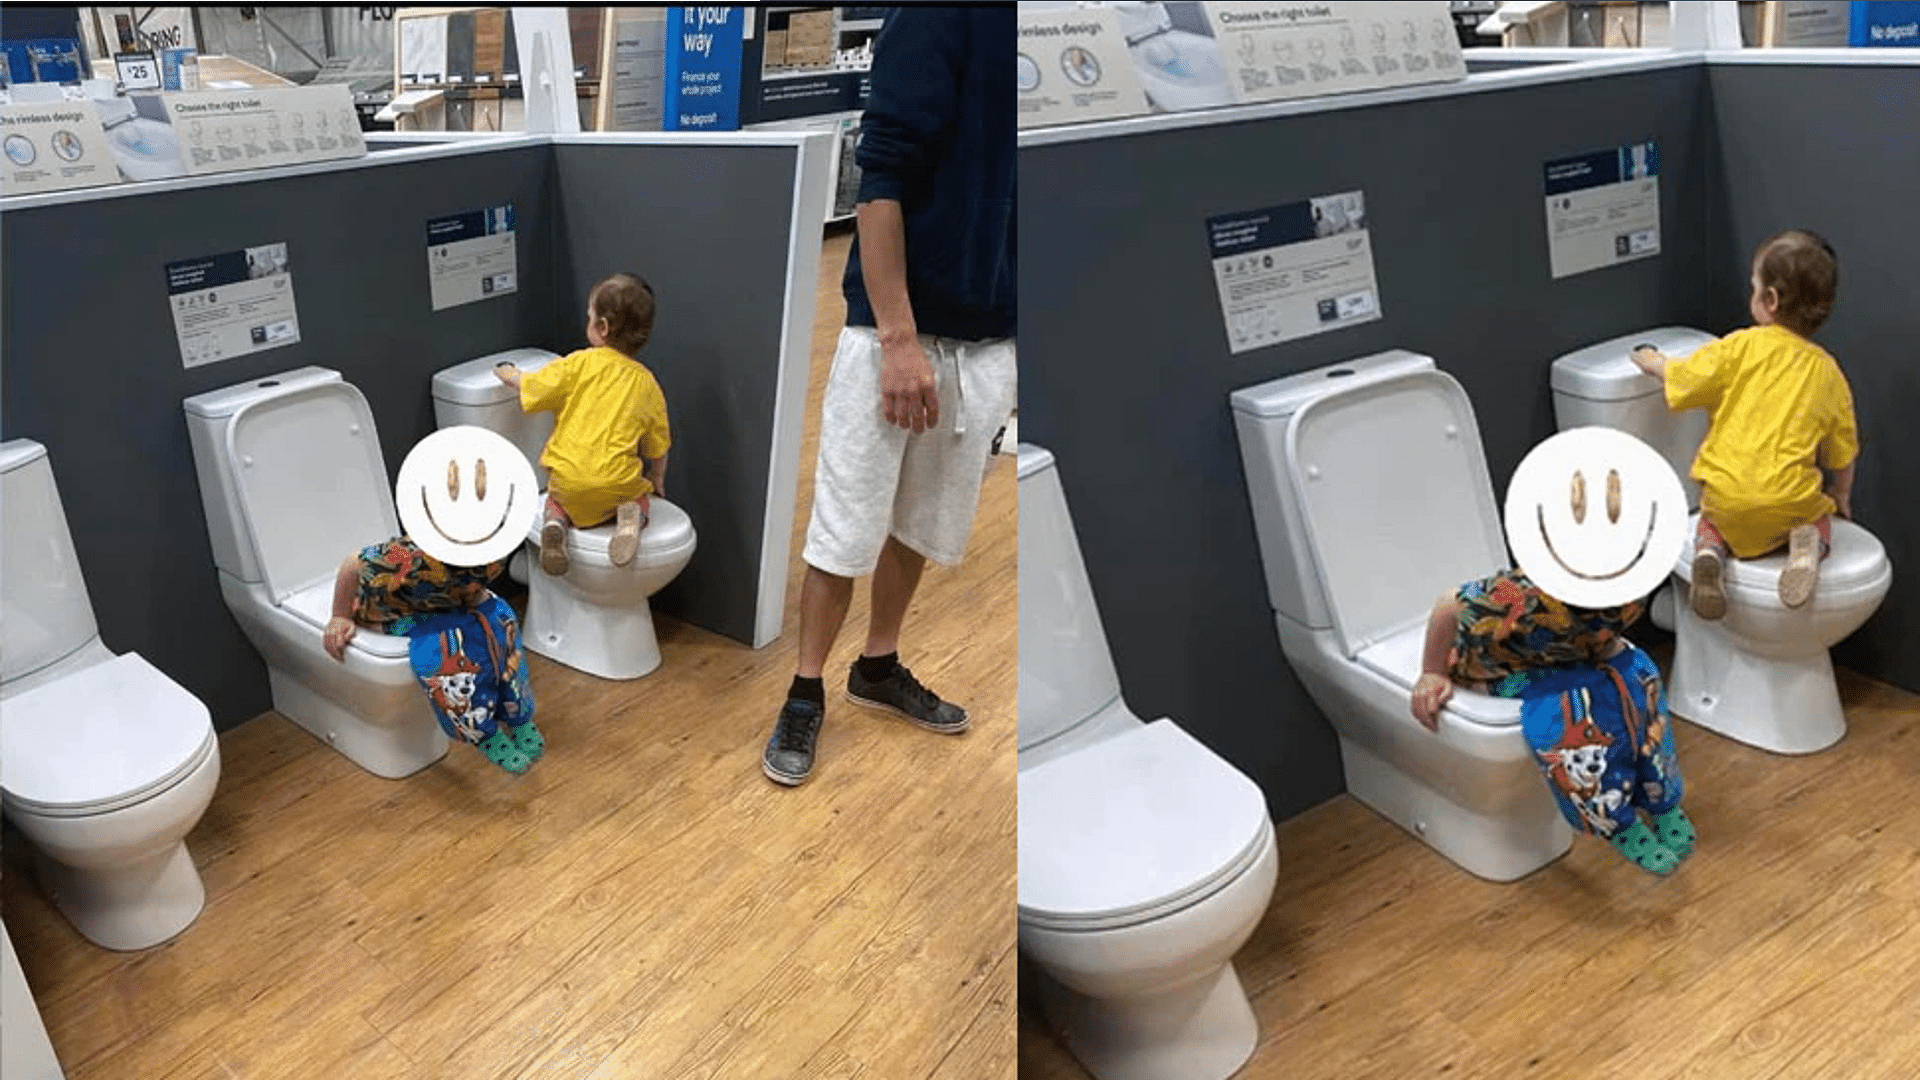 Trending News: Seeing the dummy toilet seat in the shop the children did such an act